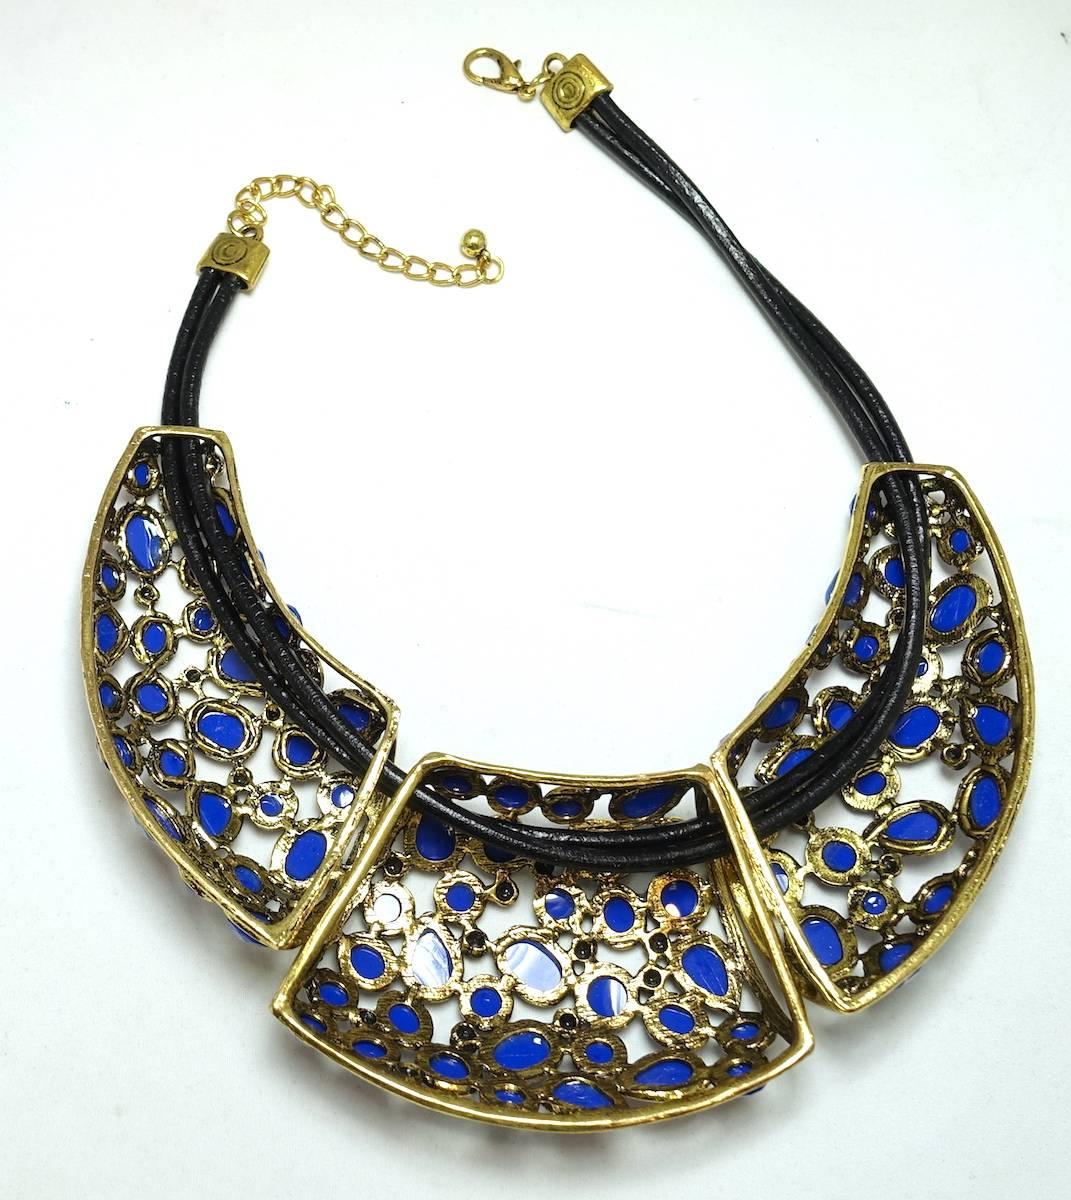 This unsigned Oscar de la Renta necklace features three sections with cobalt blue cabochon stones in a gold-tone setting. It is connected on a double row of leather straps with spring closure. The necklace measures 18” x 3-1/2” at the widest point